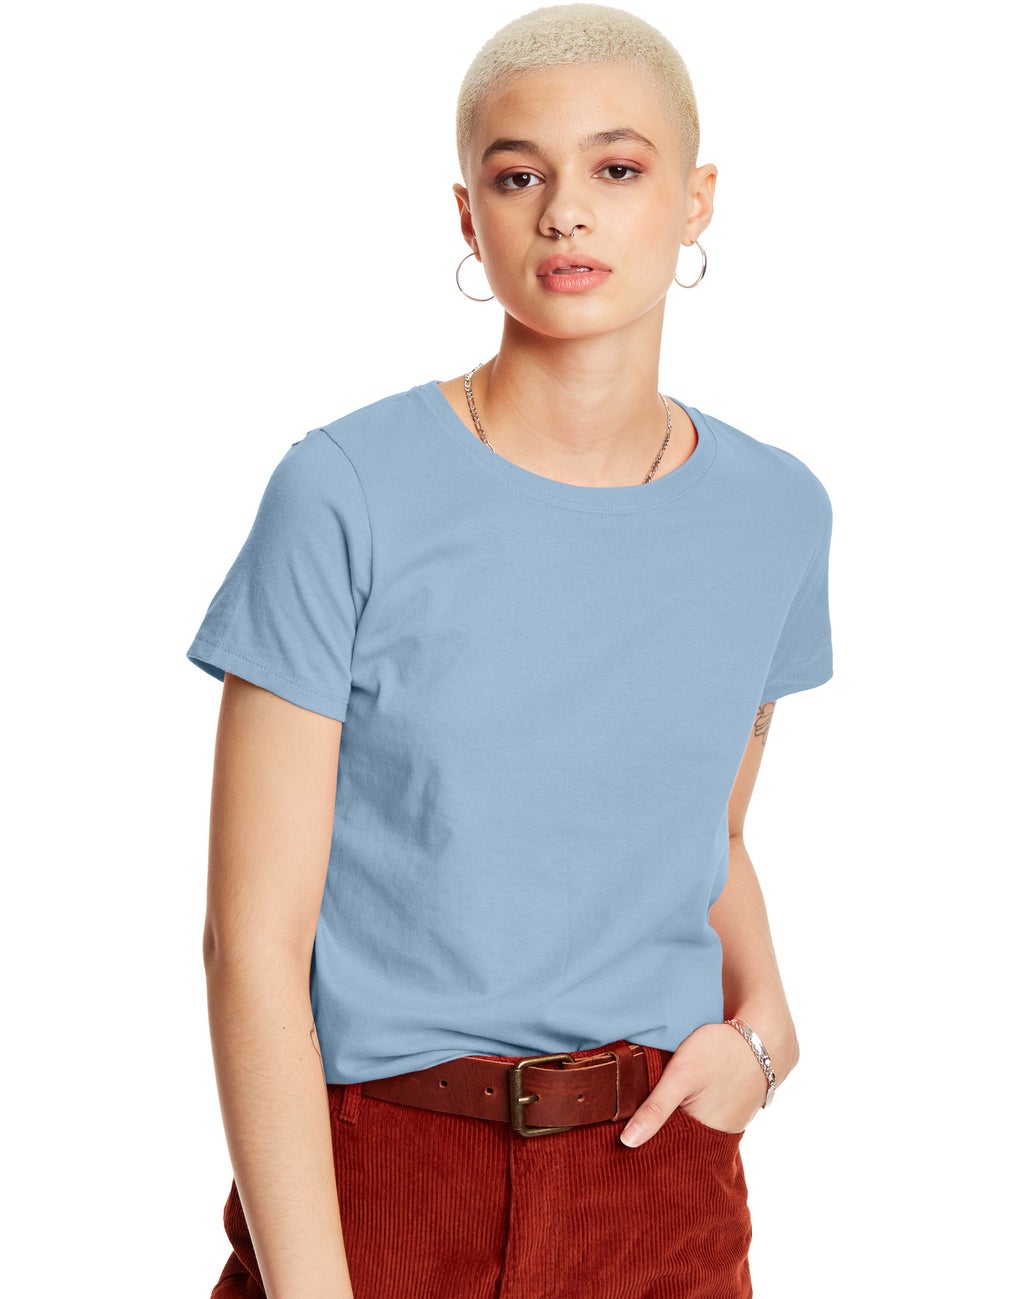 Women’s Essentials Relaxed Fit Short Sleeve Crewneck T-Shirt from Hanes